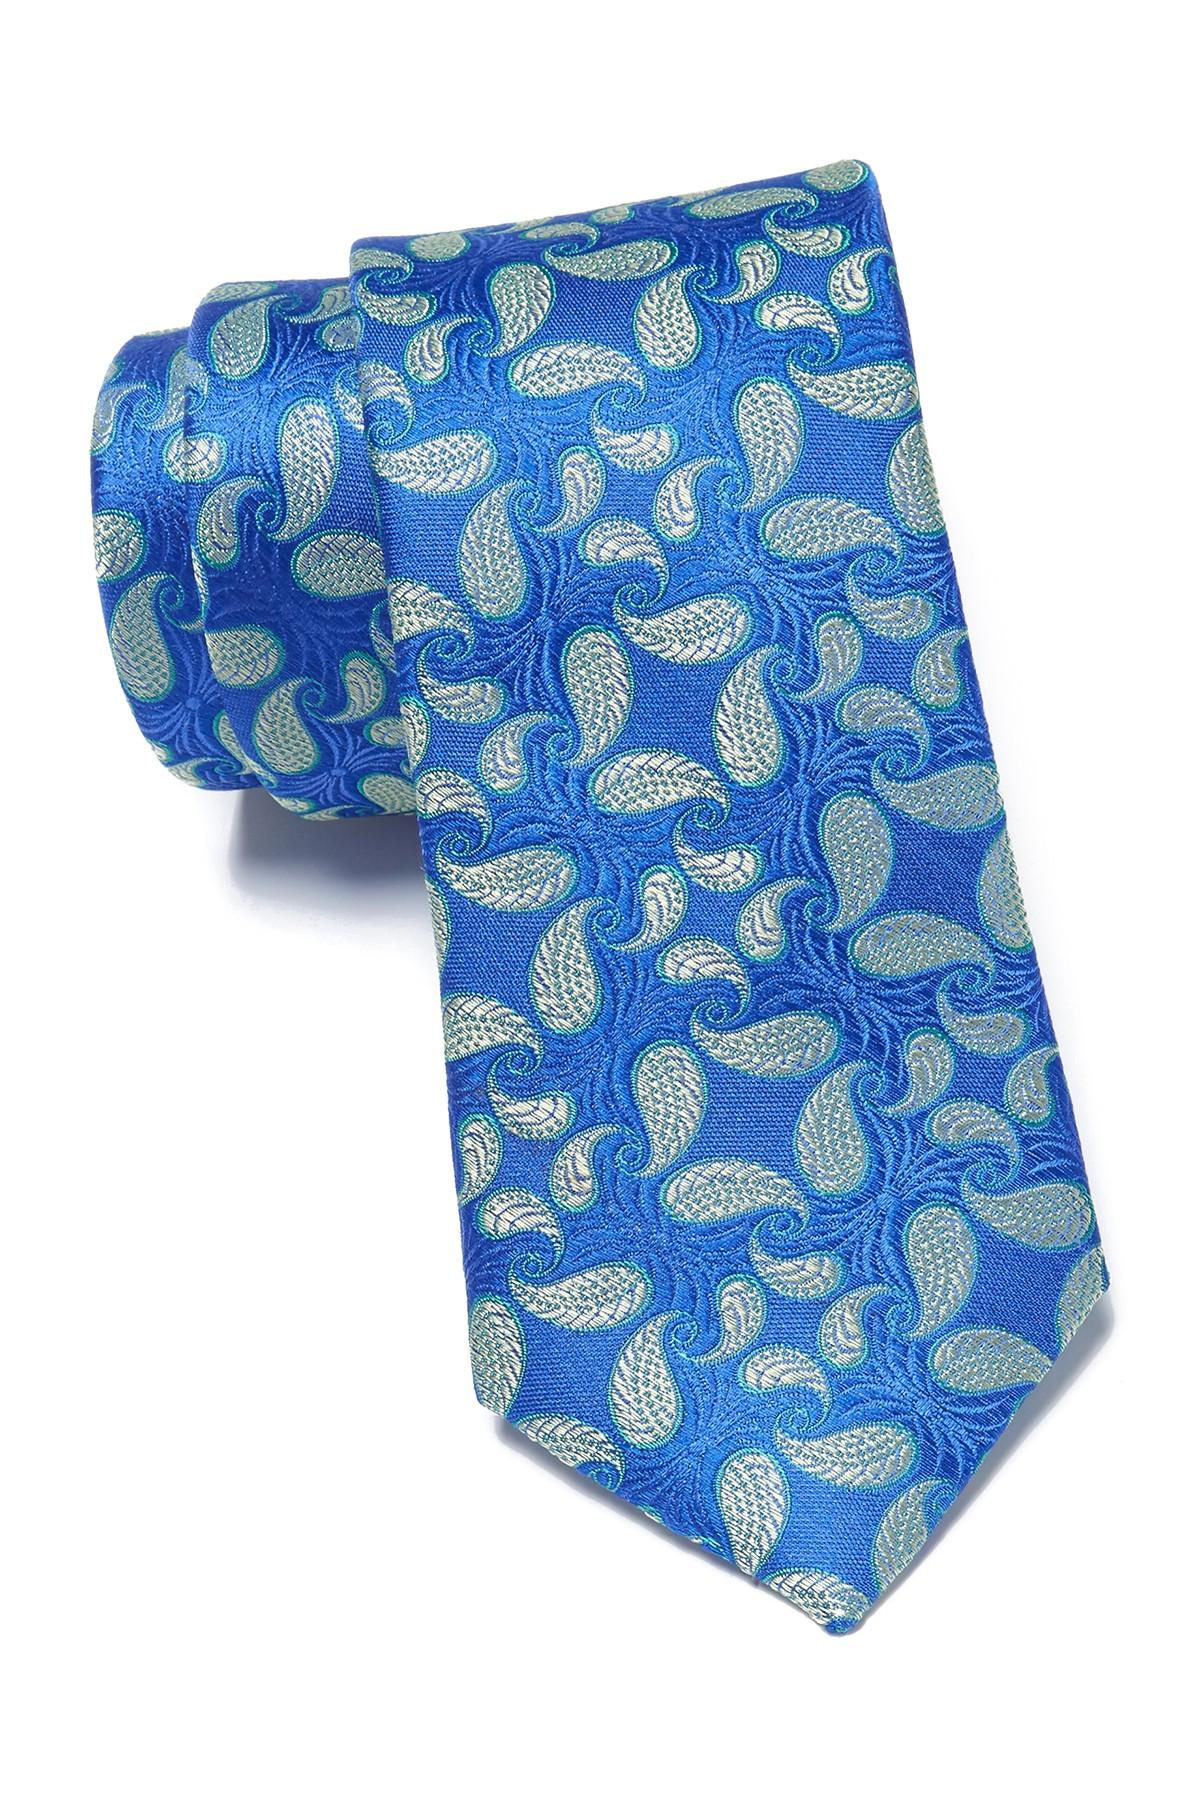 Ted Baker Tossed Paisley Silk Tie in Blue for Men - Lyst